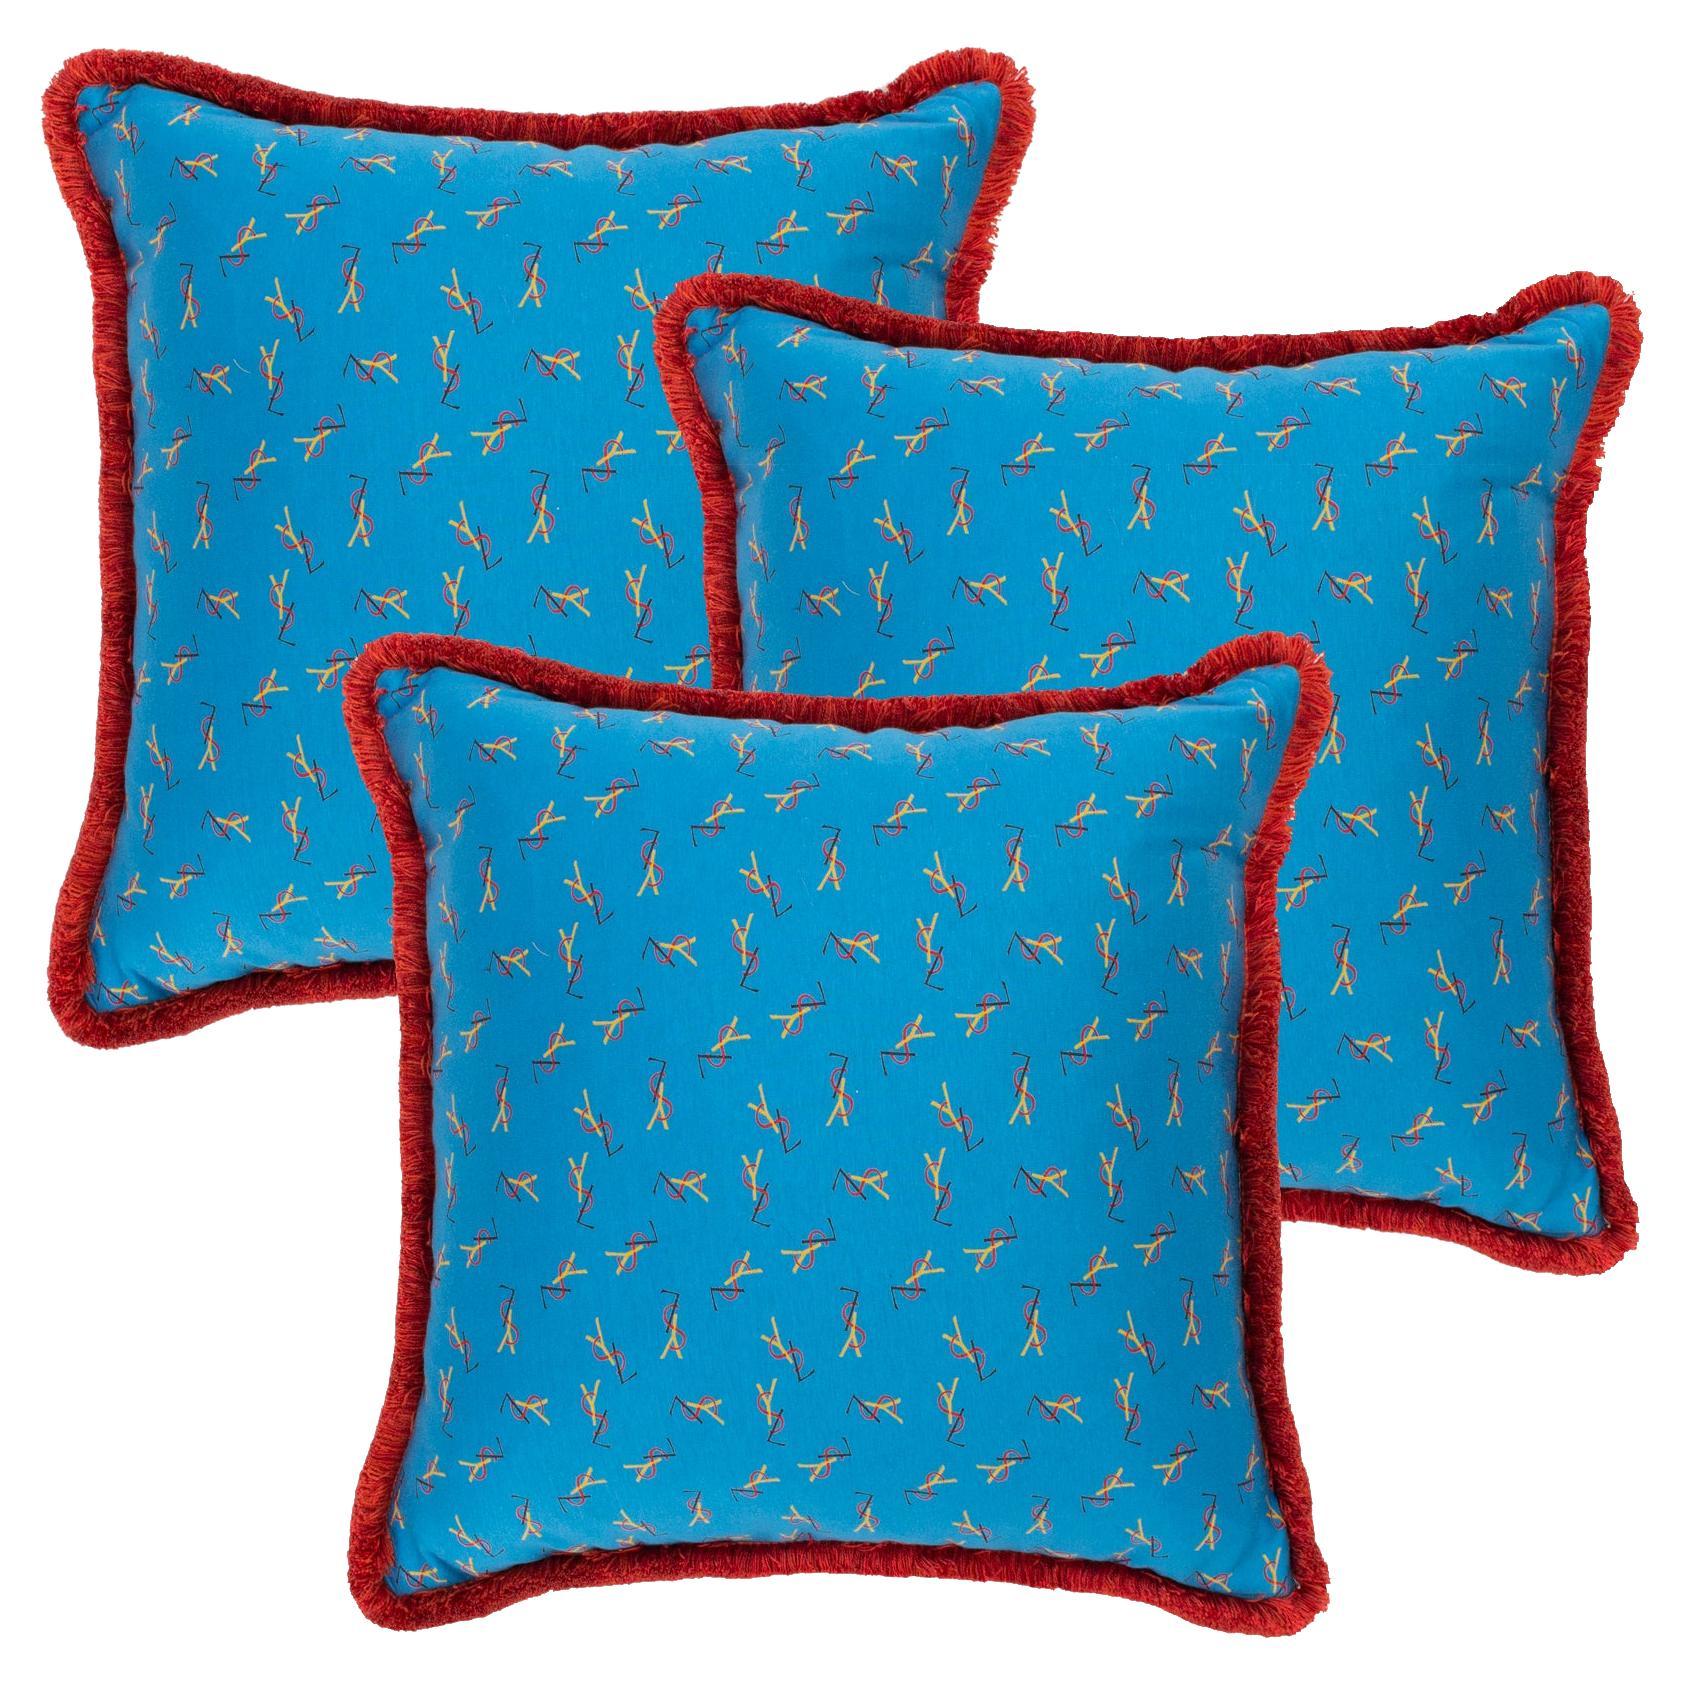 Three Handmade Pillows with YSL Logo Print, Fabric from 1980s For Sale